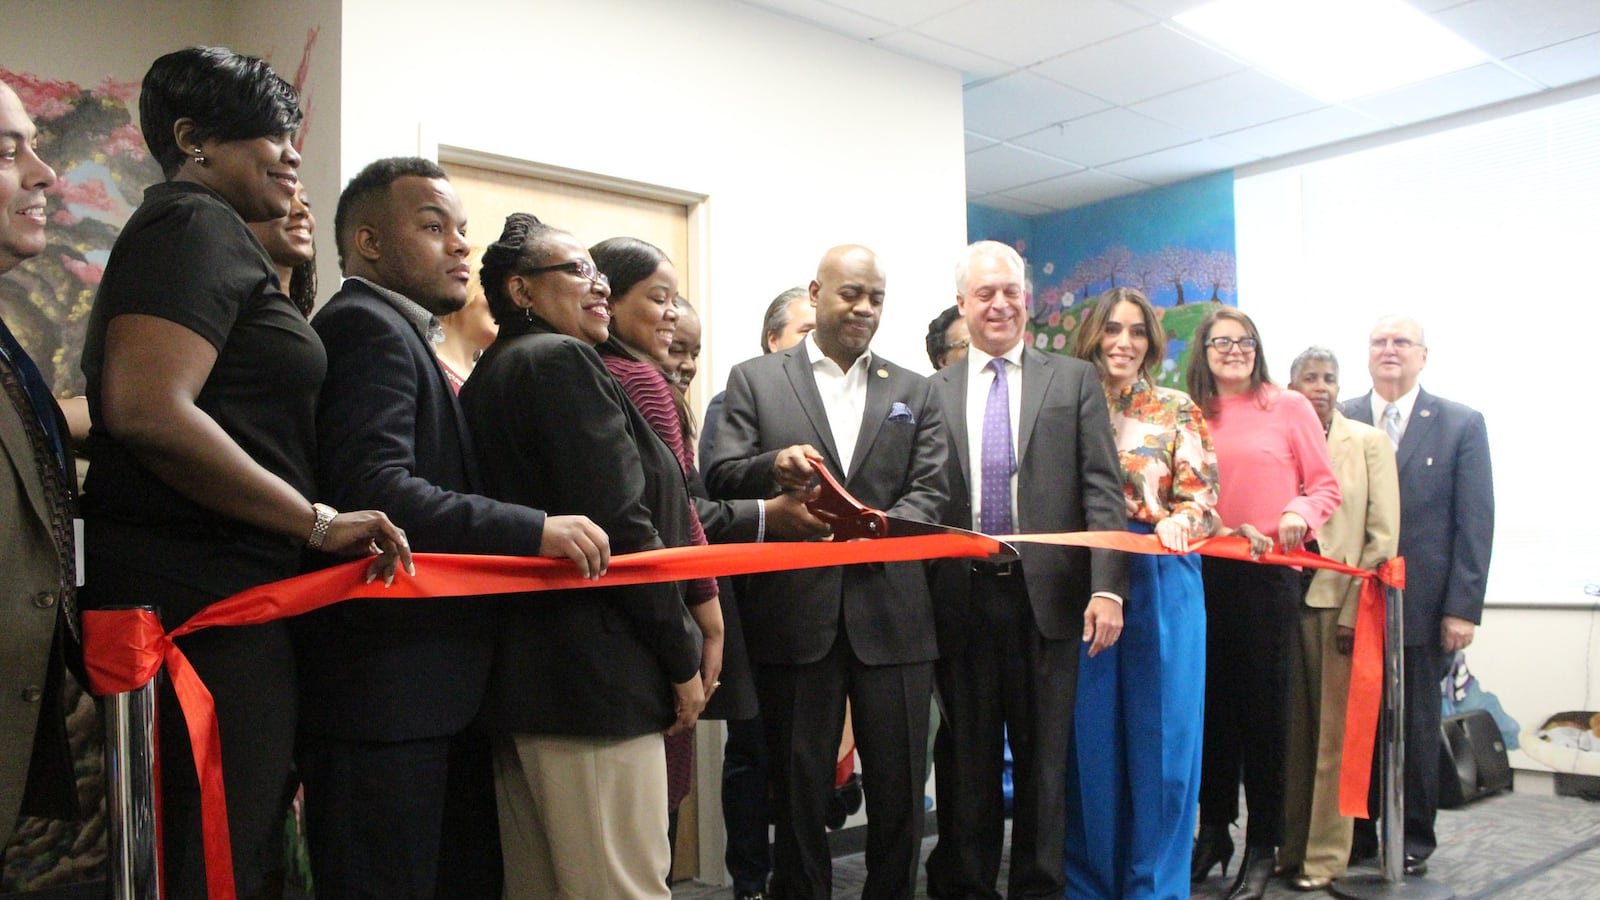 Mayor Ras Baraka cut the ribbon on the Newark Public Schools’ new headquarters in January, along with outgoing Superintendent Christoper Cerf and members of the Newark school board.